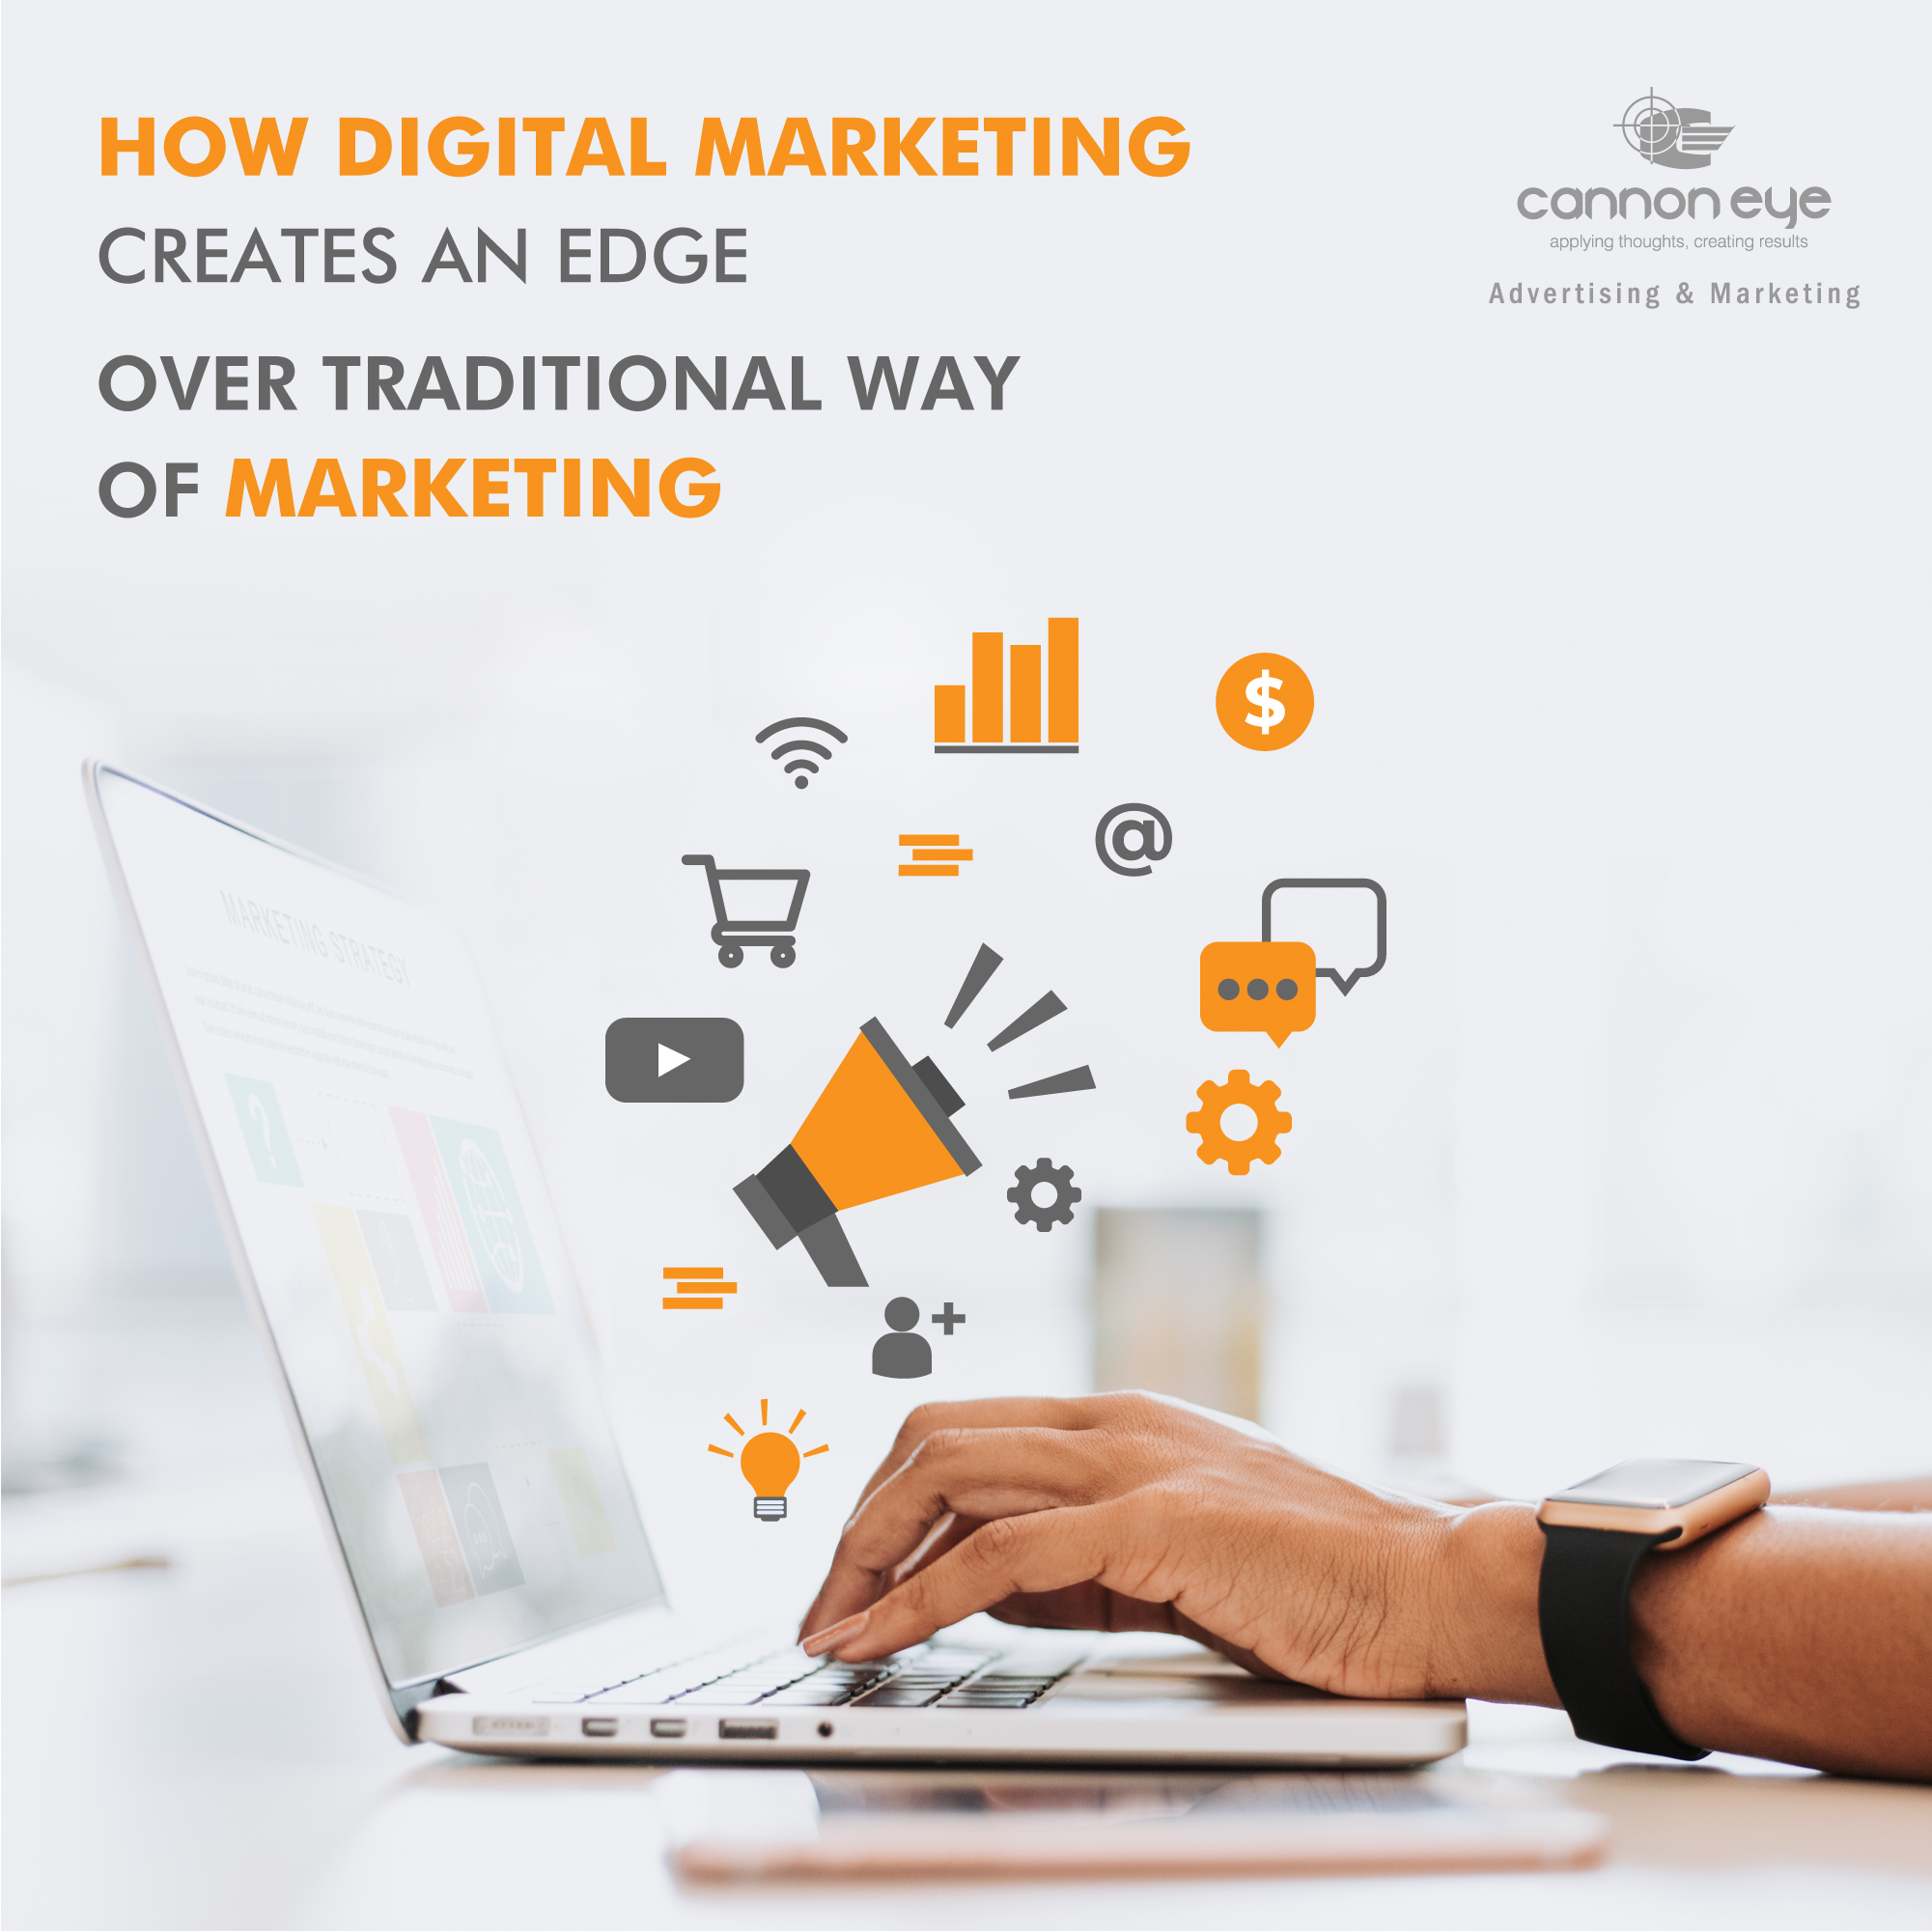 How Digital Marketing has excelled over Traditional Marketing